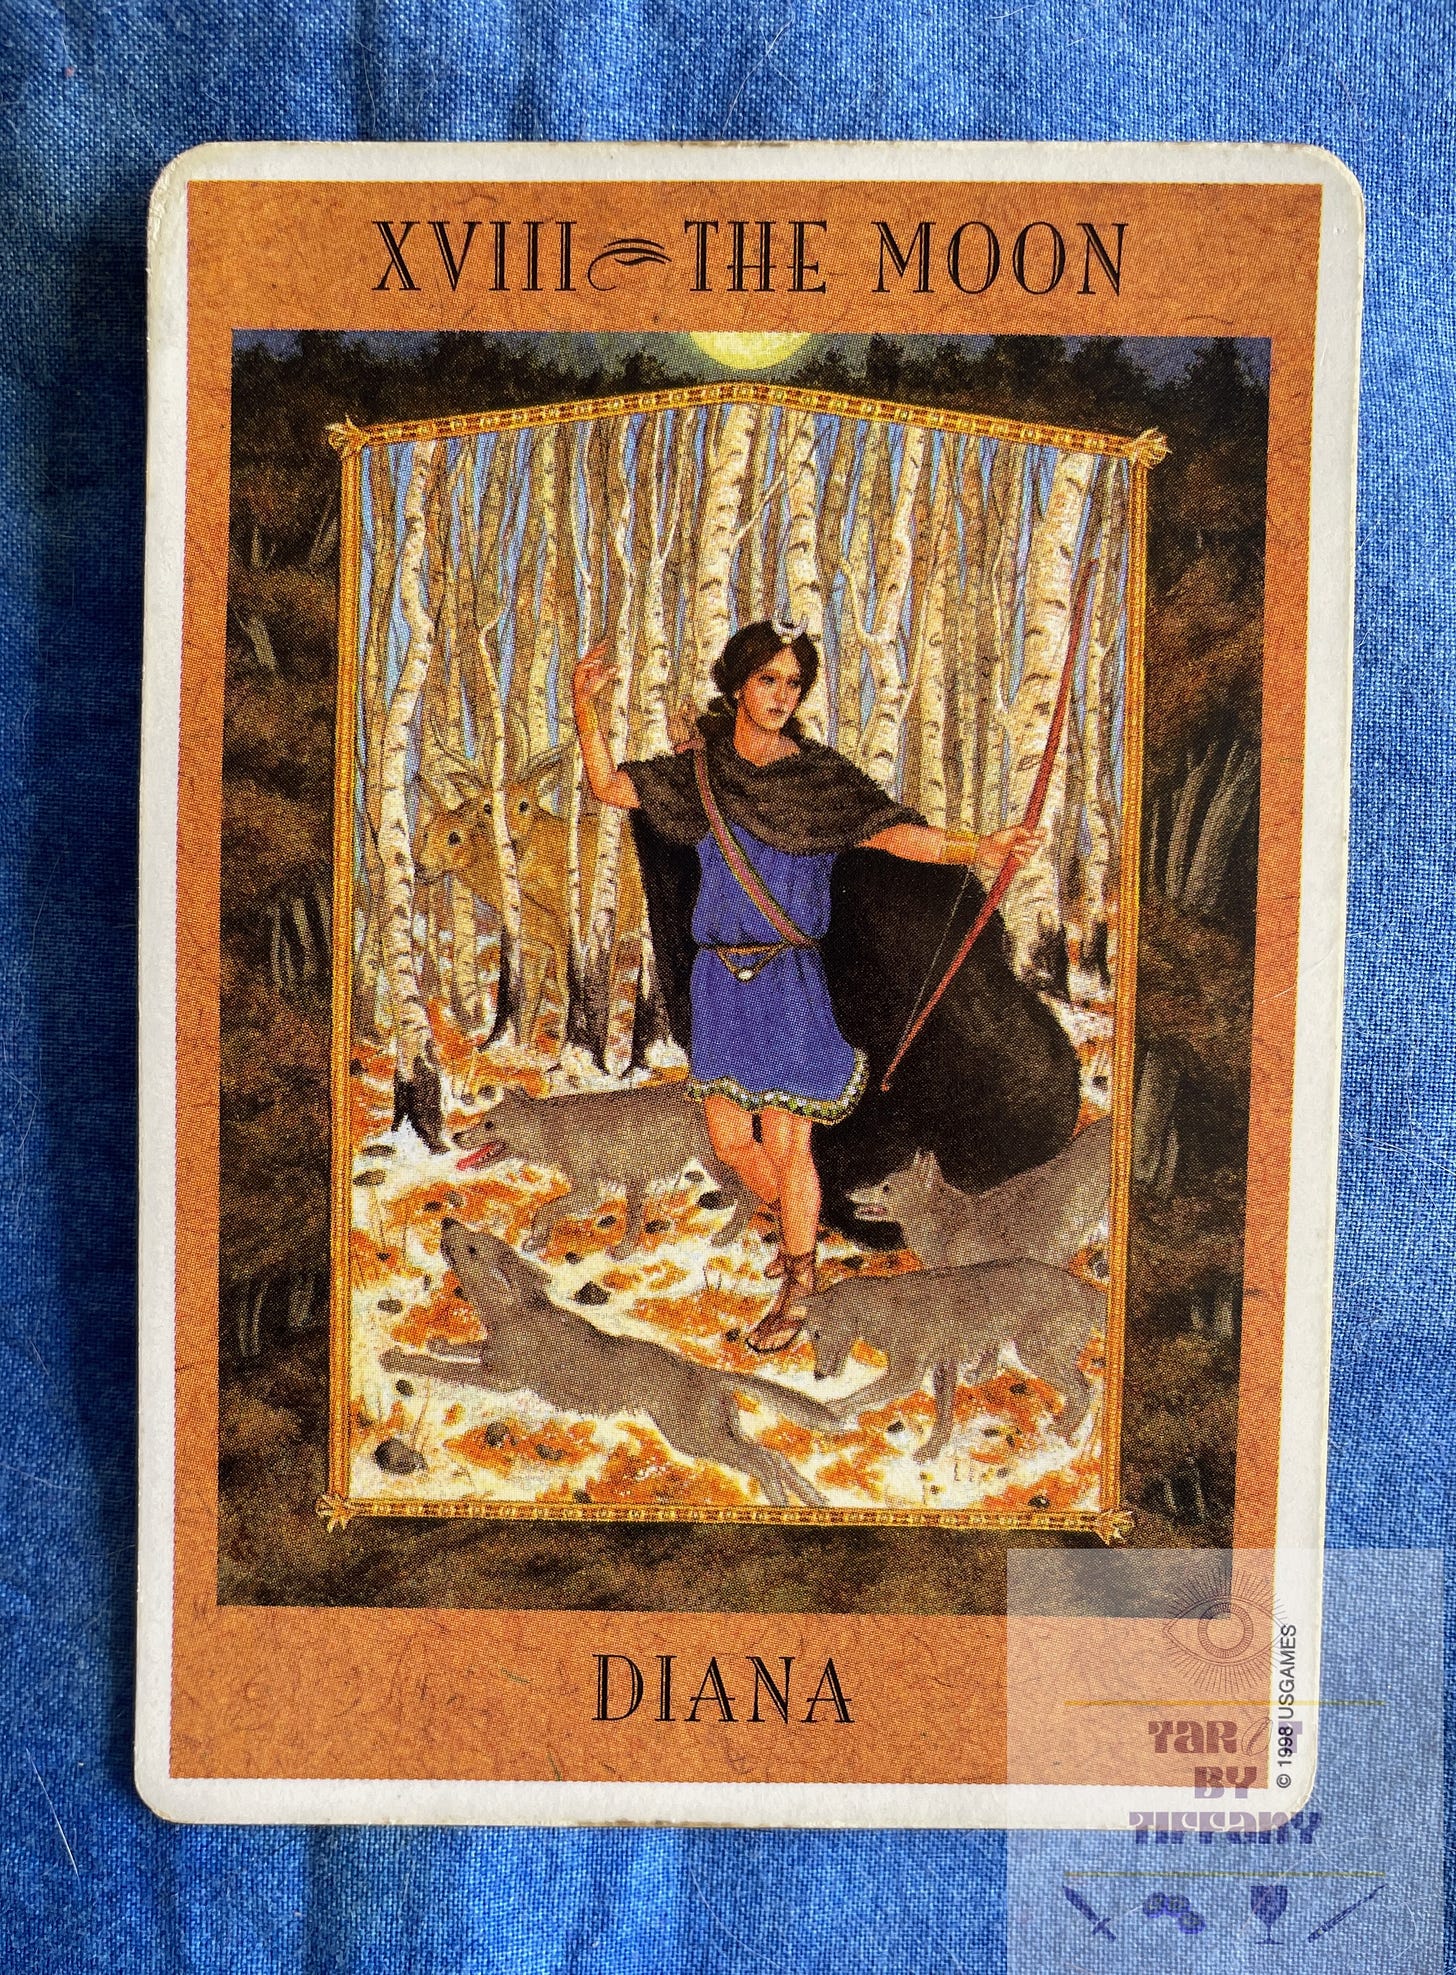 Image of the Moon card from the Goddess Tarot. The card shows the goddess Diana dressed in a blue tunic and a fur cape. She is holding her bow in her left hand and her right hand is raised as if she has just released an arrow. Four gray wolves surround her feet in a circle; they are her wolves. There is snow on the ground and the trees are bare. Behind her are two deer, hiding behind one of the bare tree trunks. The card is laying on a cobalt blue cloth background.